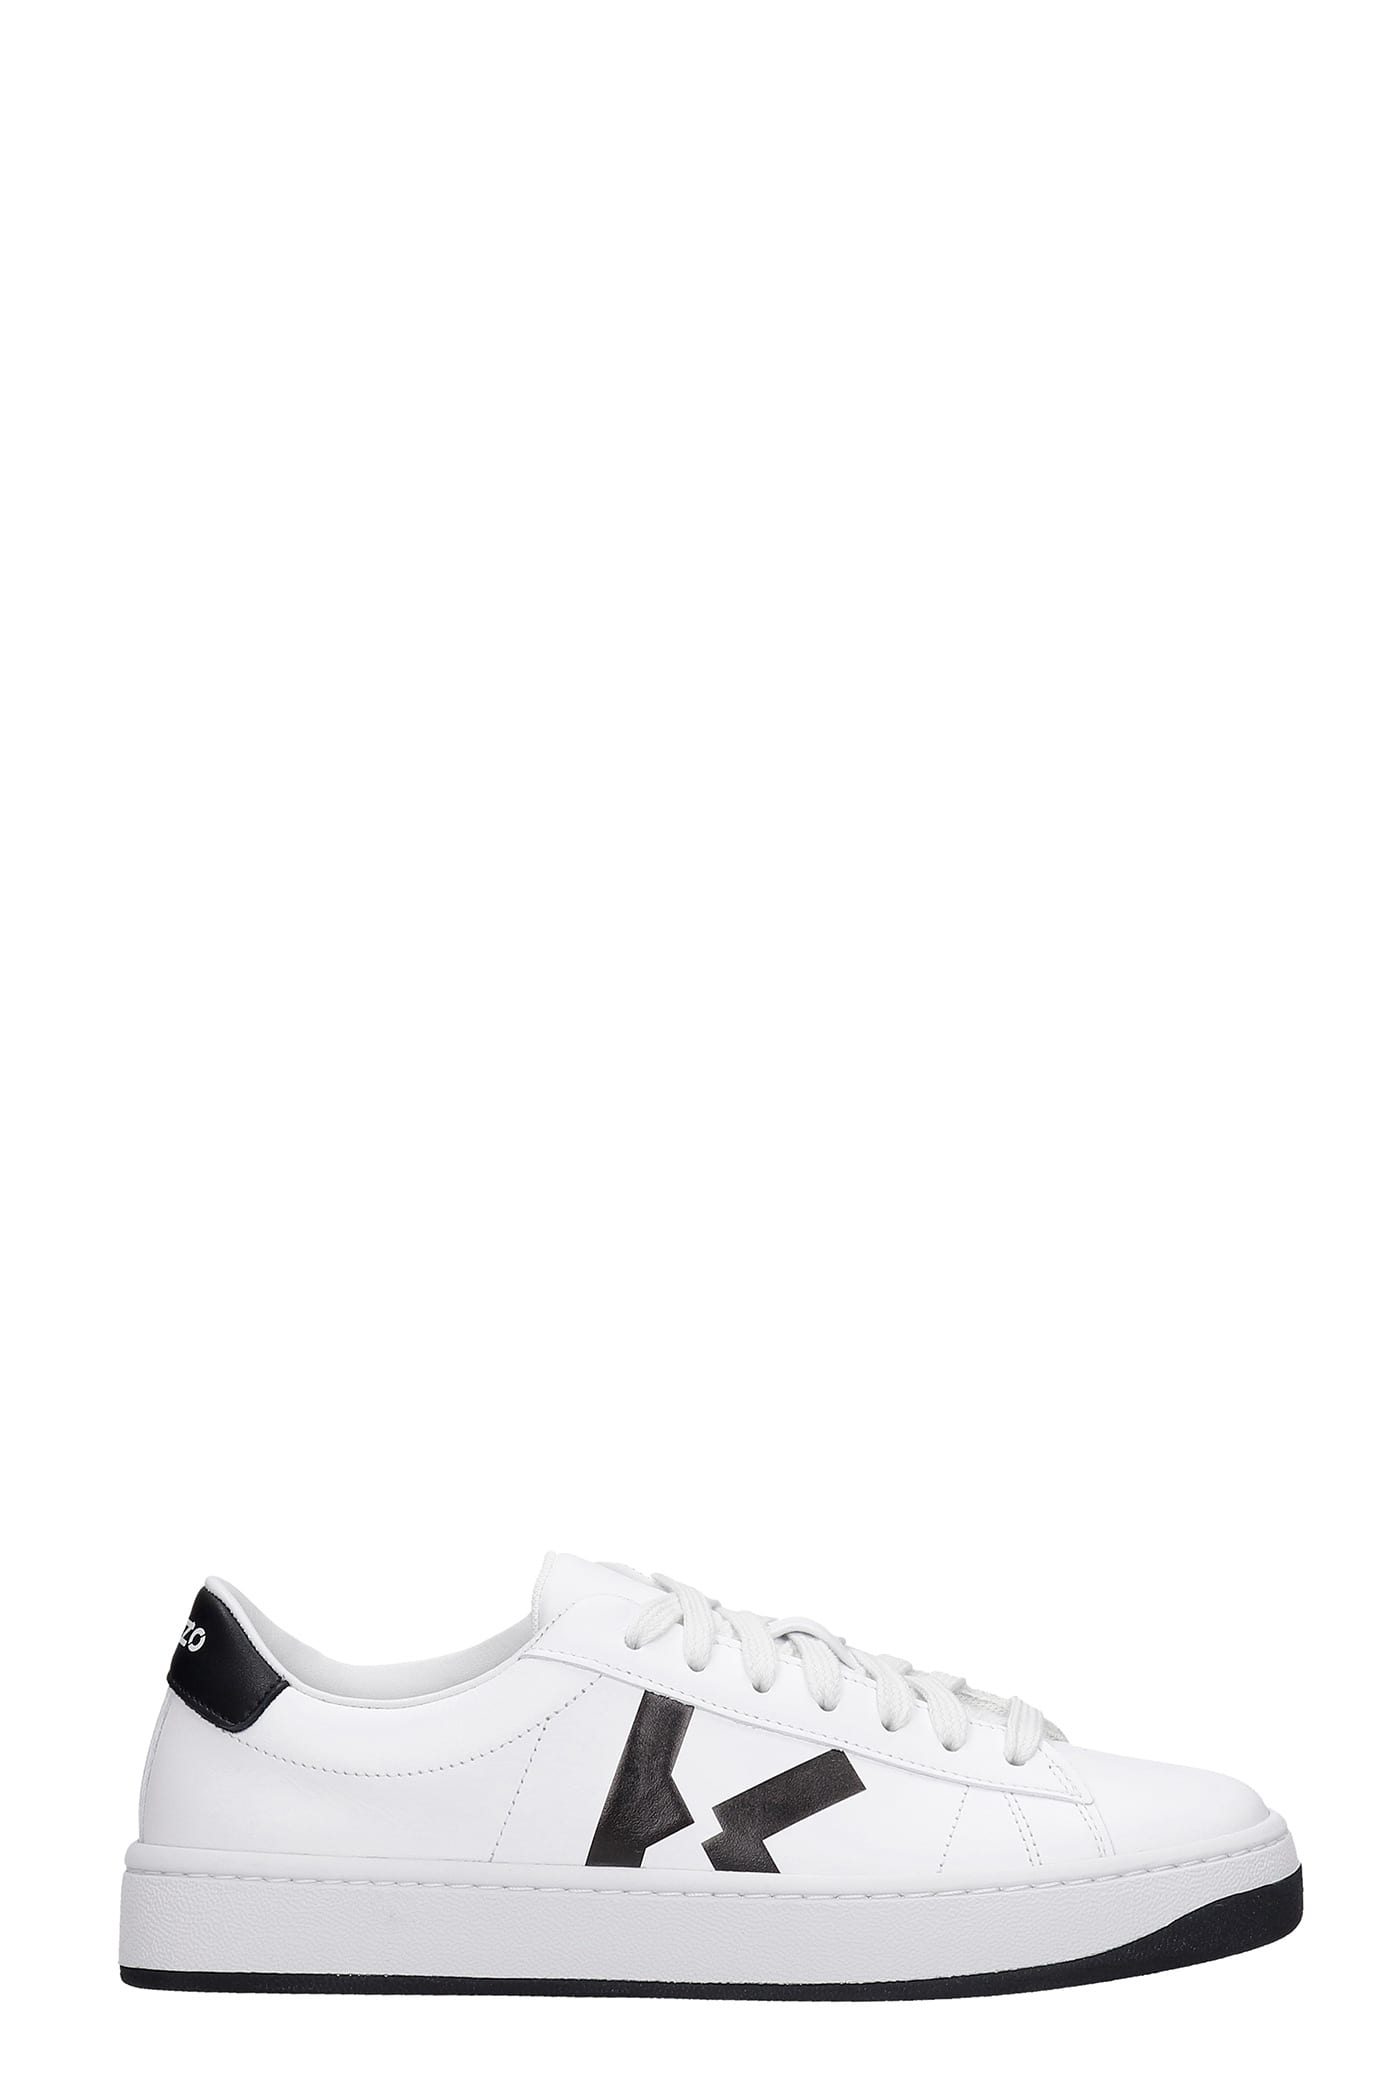 Buy Kenzo Sneakers In White Leather online, shop Kenzo shoes with free shipping